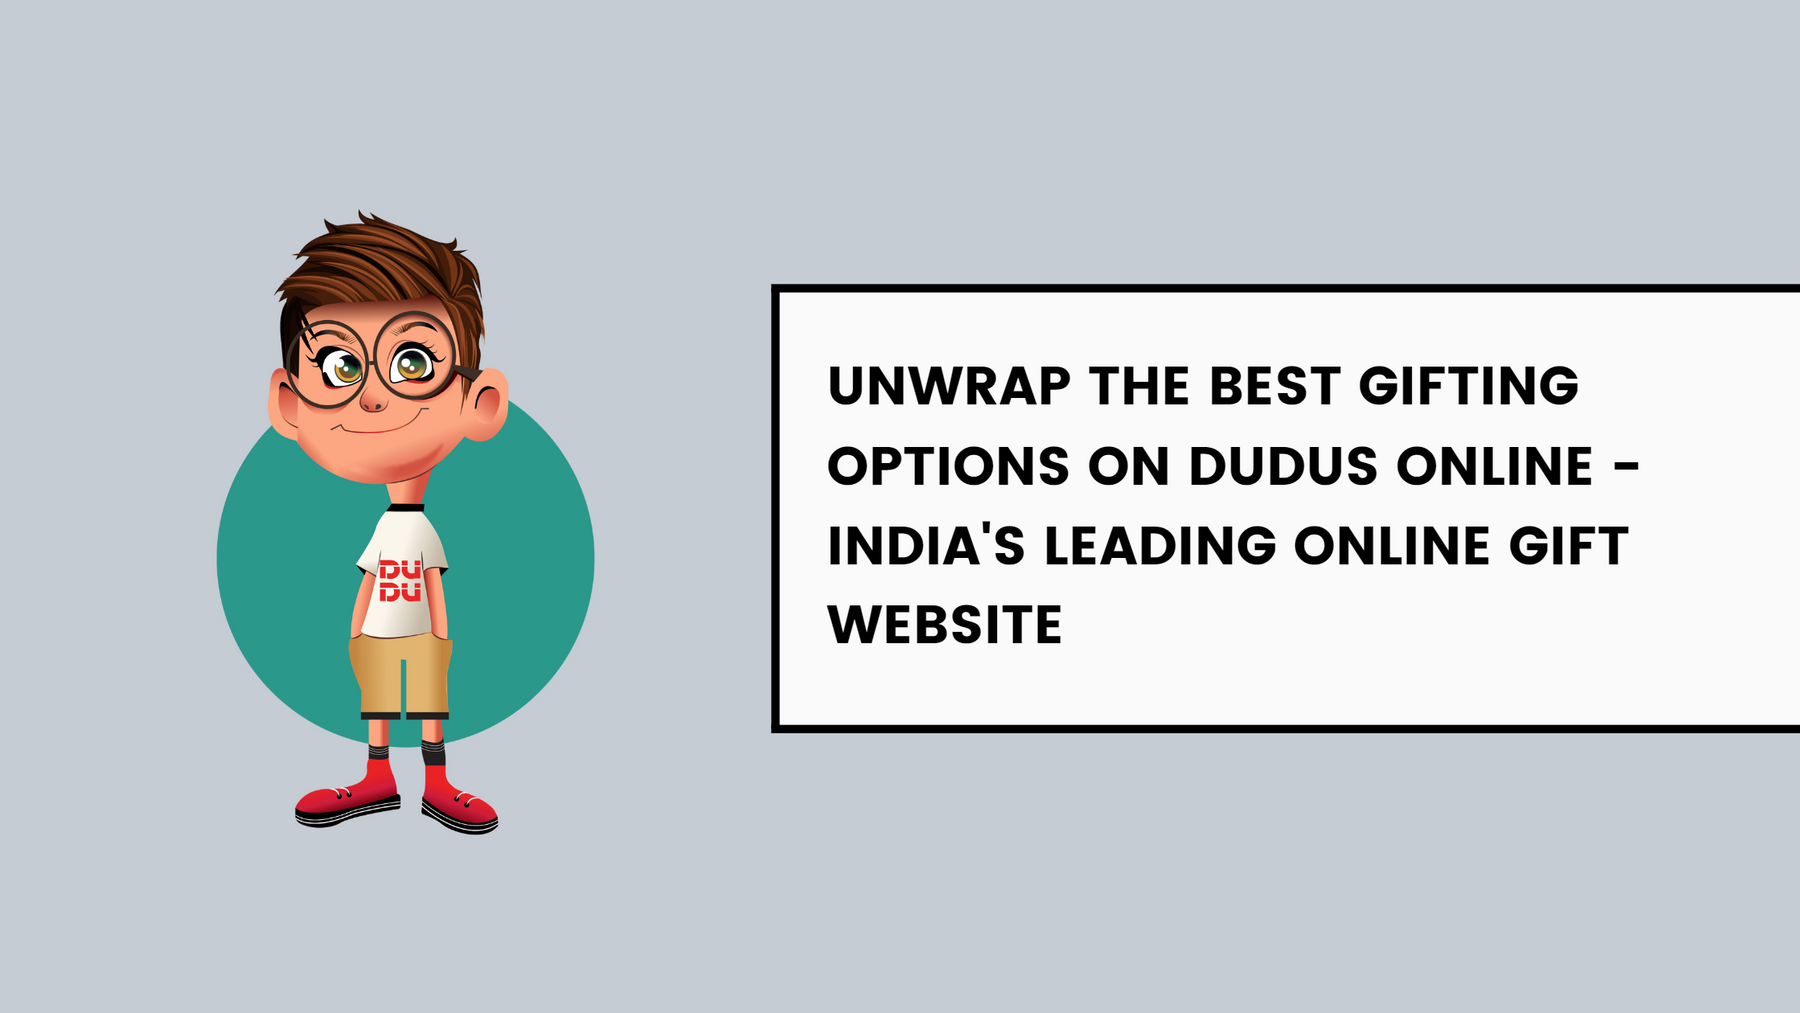 Unwrap The Best Gifting Options On Dudus Online - India's Leading Online Gift Website